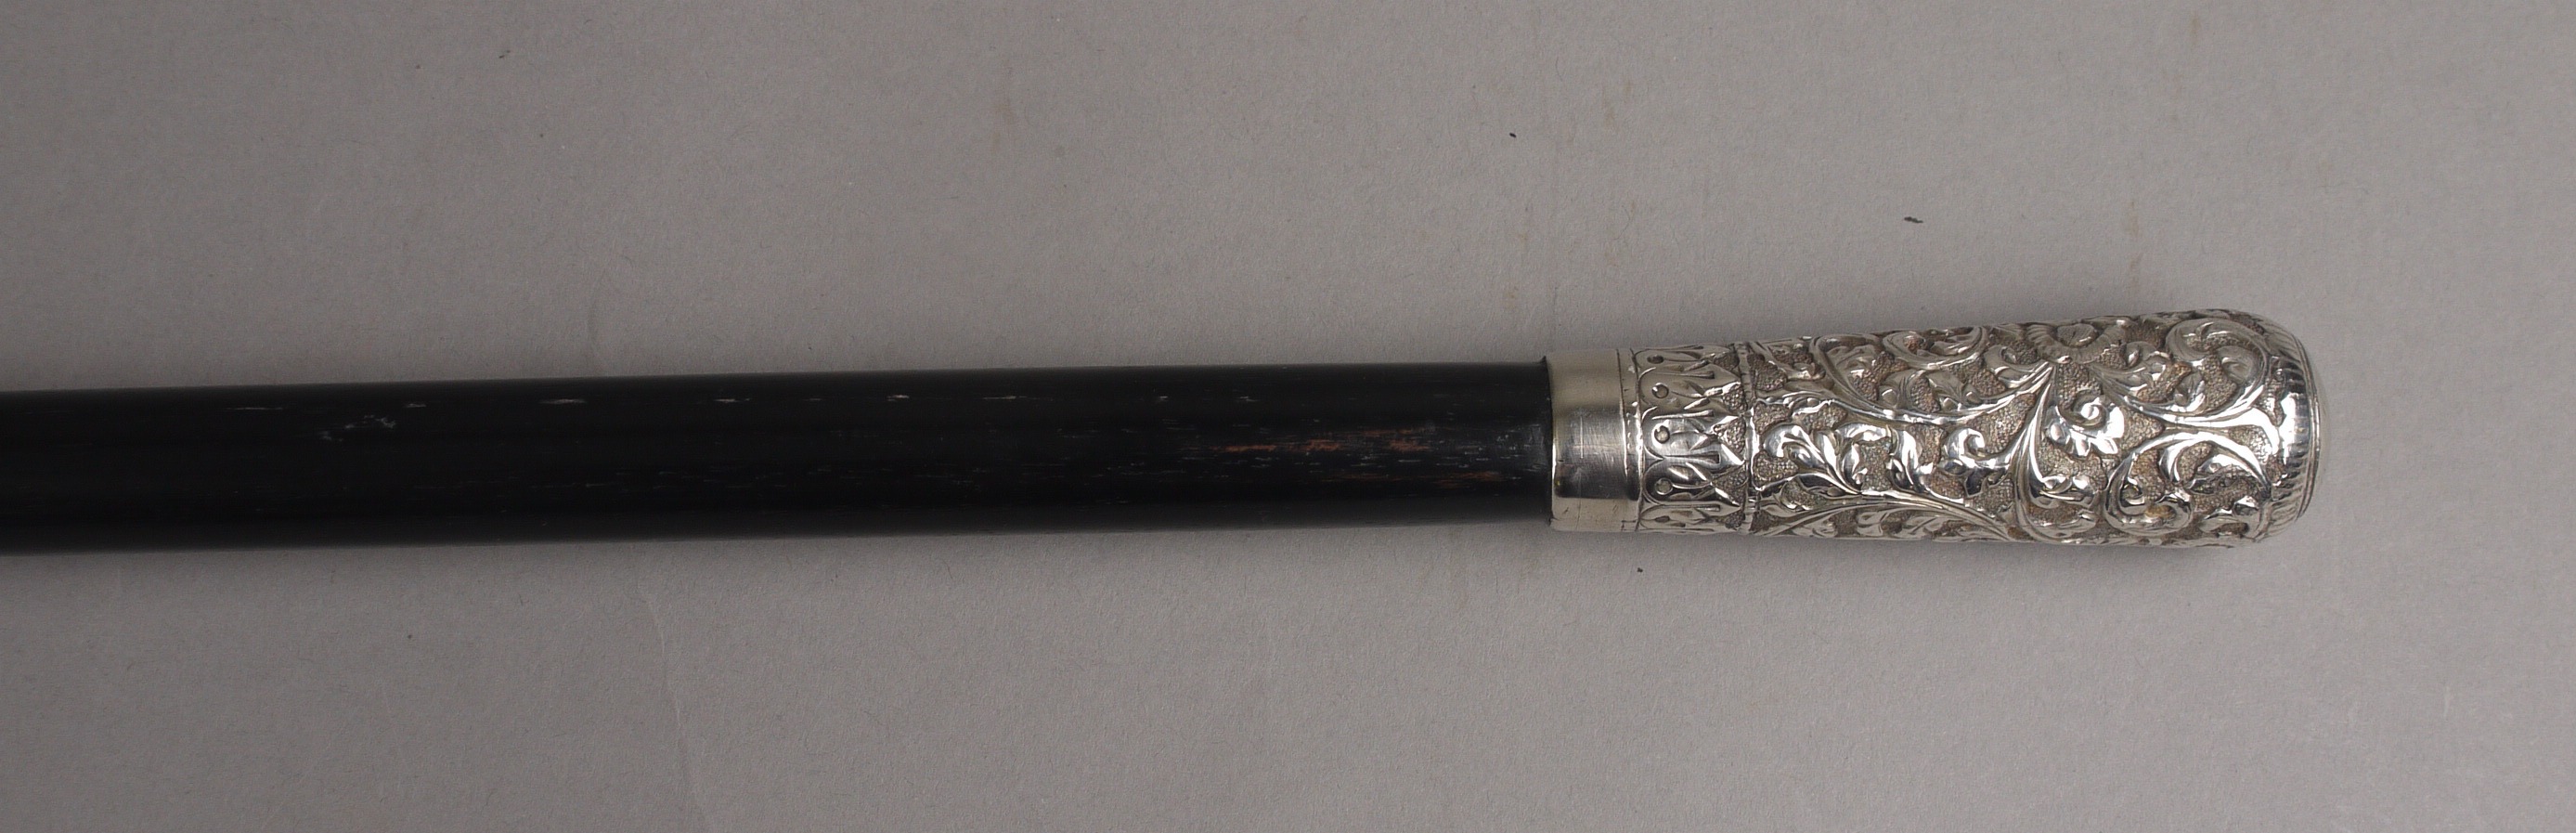 AN EDWARD VII EBONISED WALKING CANE, with a silver mount, chased with flowers and foliate scrolls,